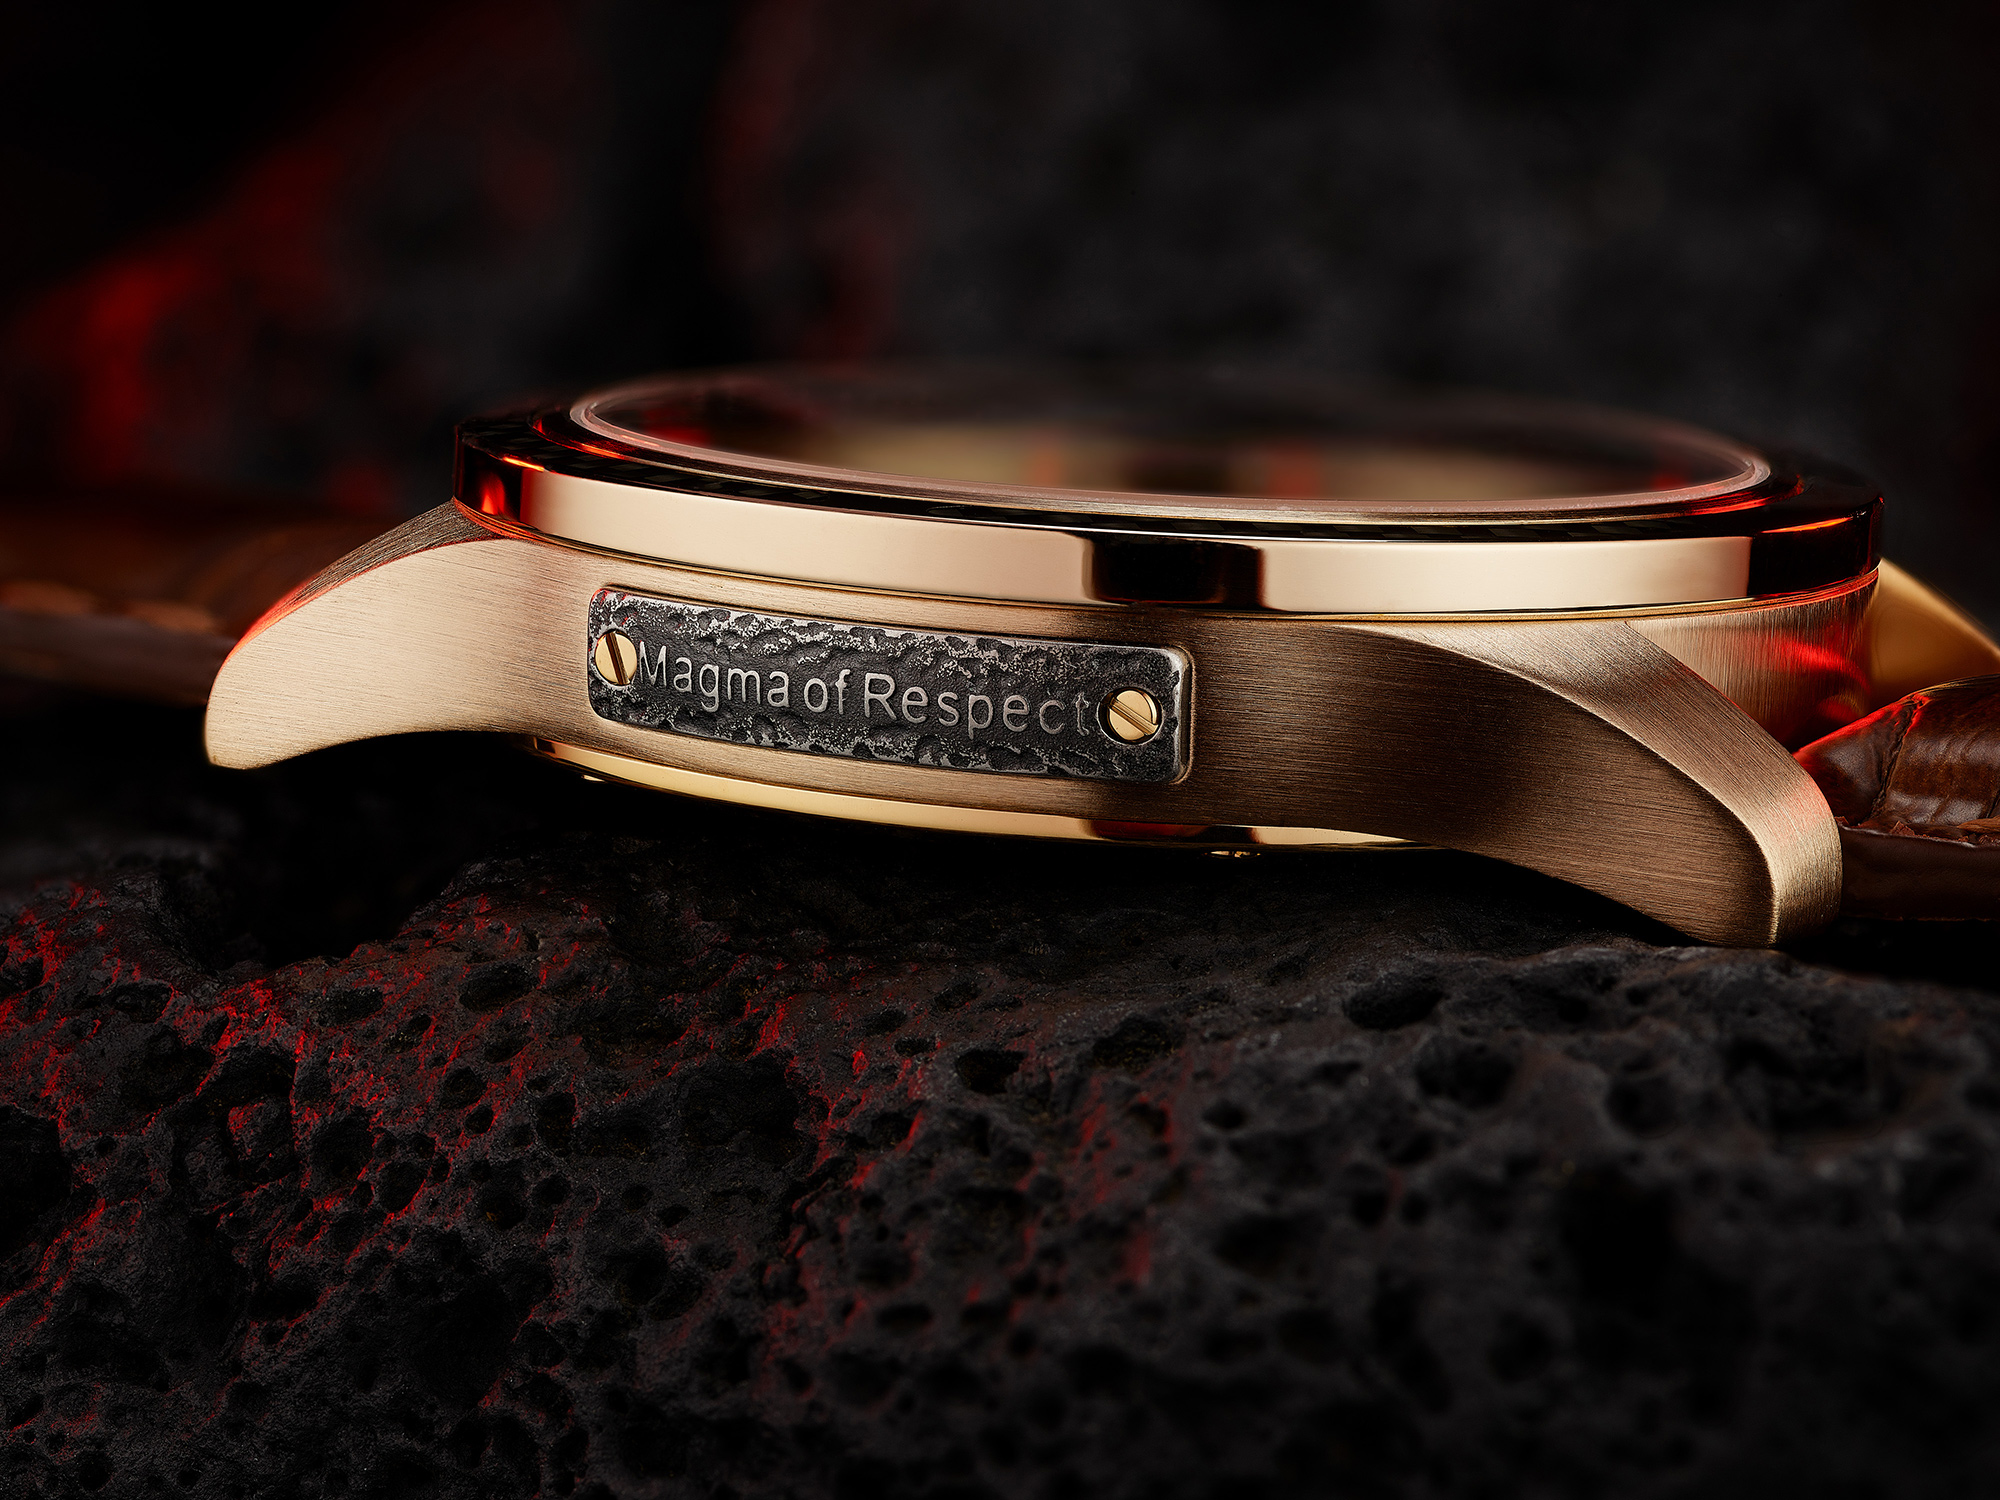 Second image of the magma bronze watch carousel